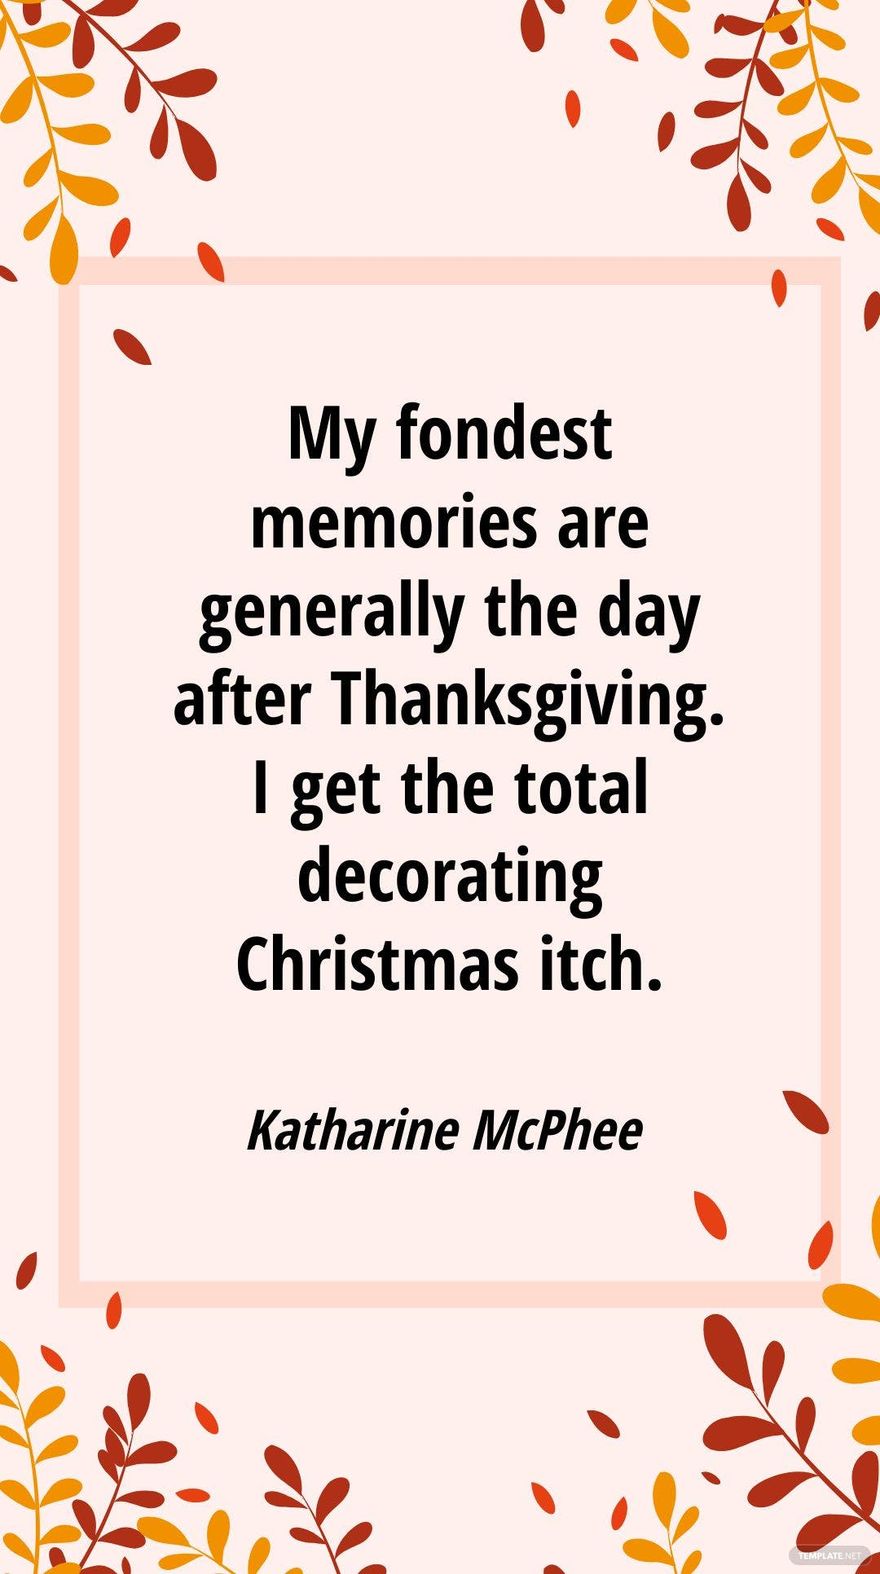 Free Katharine McPhee - My fondest memories are generally the day after Thanksgiving. I get the total decorating Christmas itch. in JPG